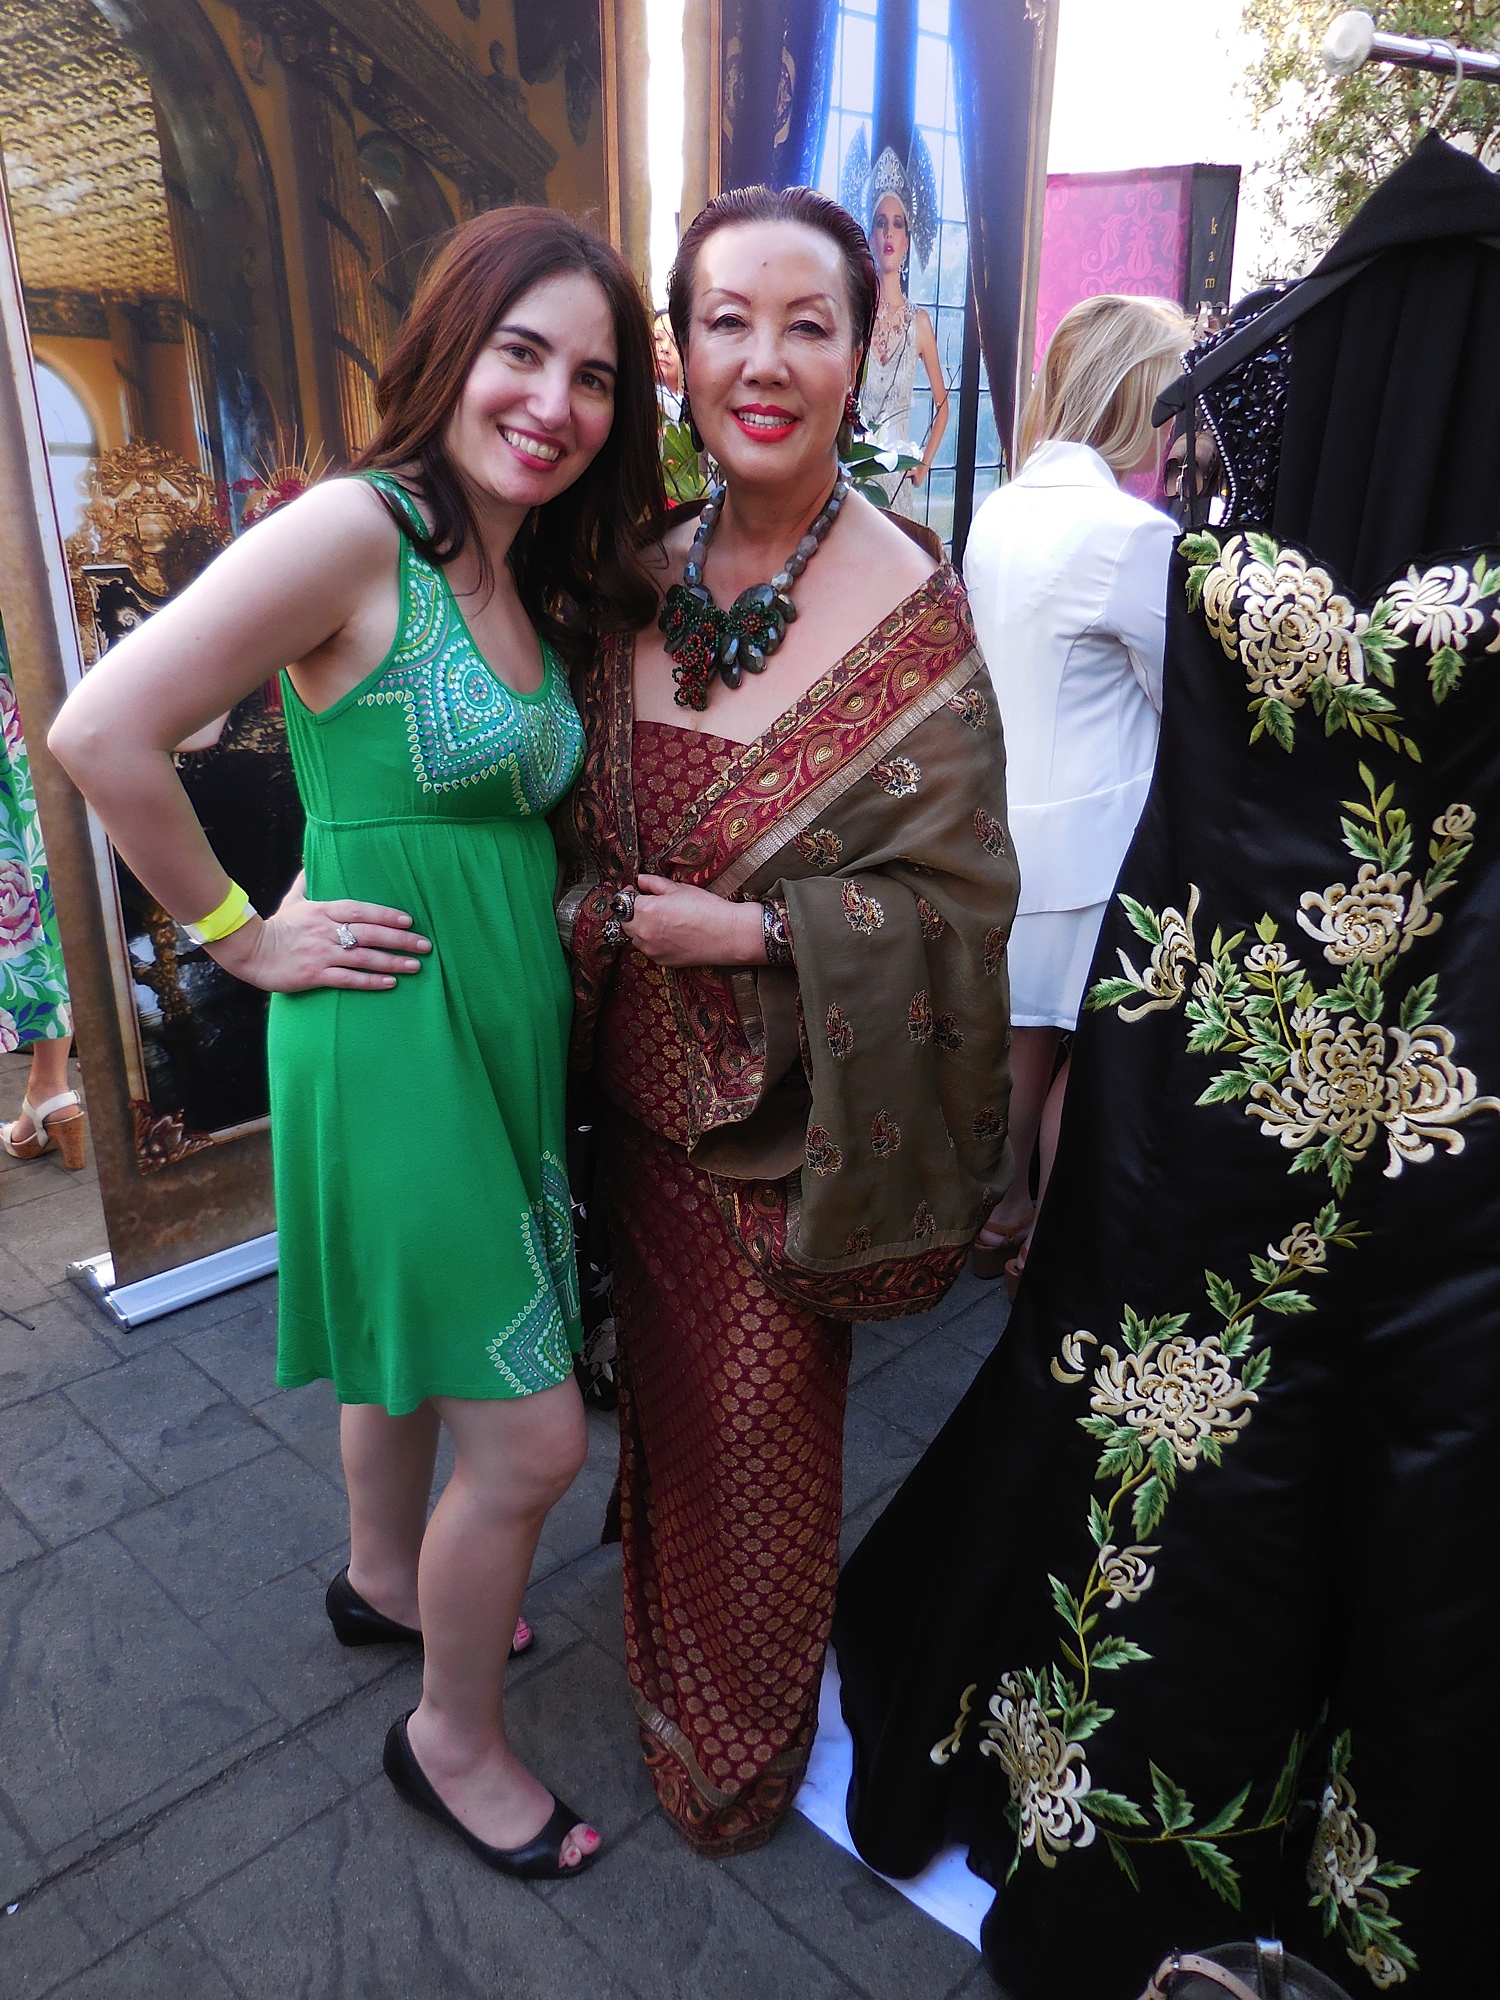 With the lovely Sue Wong, one of my favorite designers on the planet with one of her dresses. Ever the perfectionist, Sue kept telling me, "Vida, please stand beside the dress, as it has green it in like your dress. It'll look nice. I'm very visual you know." 